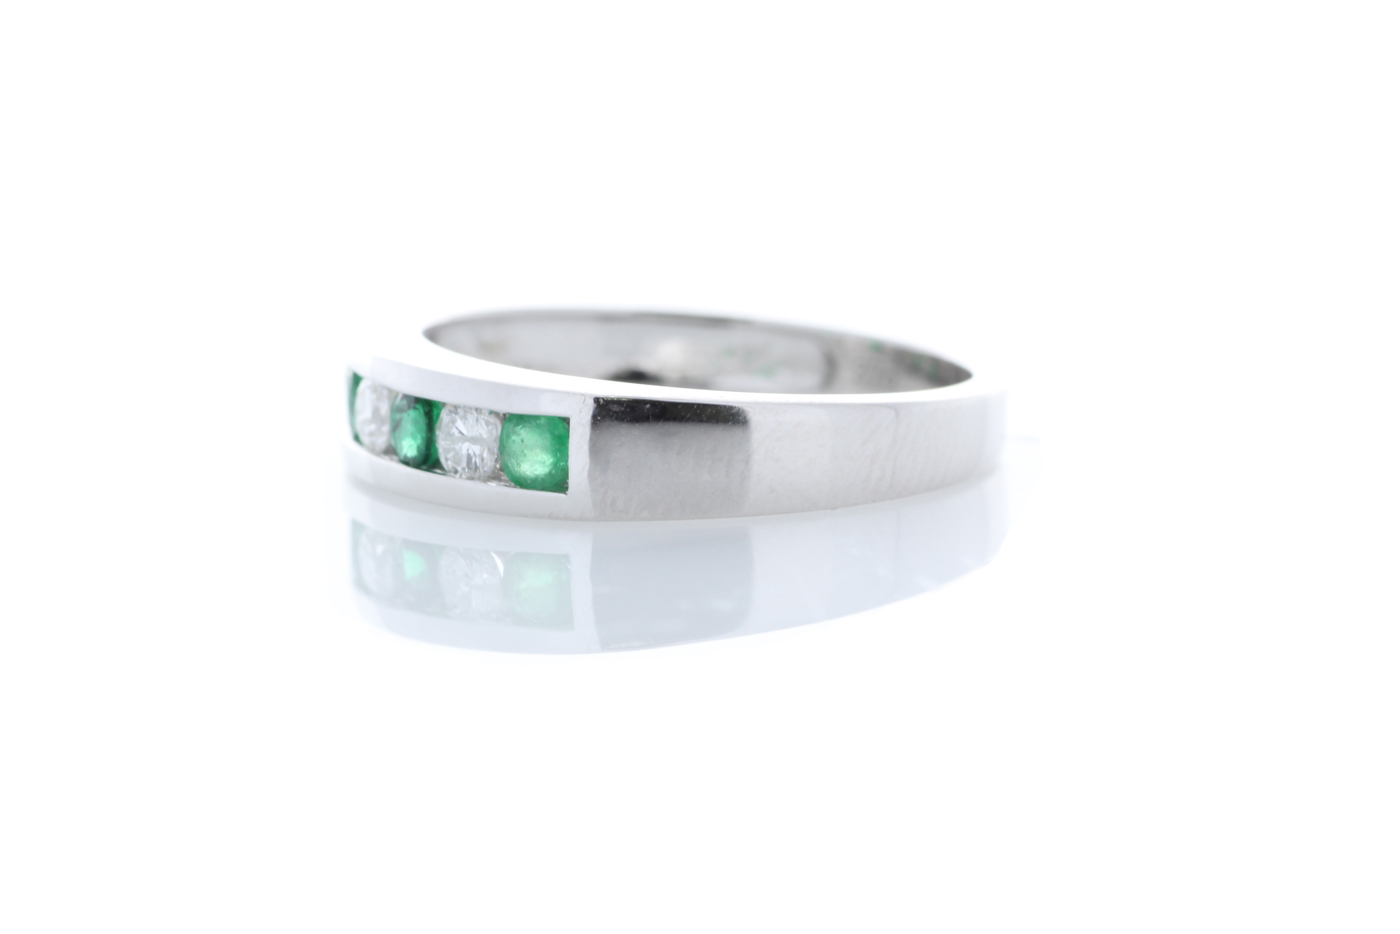 9ct White Gold Channel Set Semi Eternity Diamond And Emerald Ring 0.25 Carats - Image 2 of 5